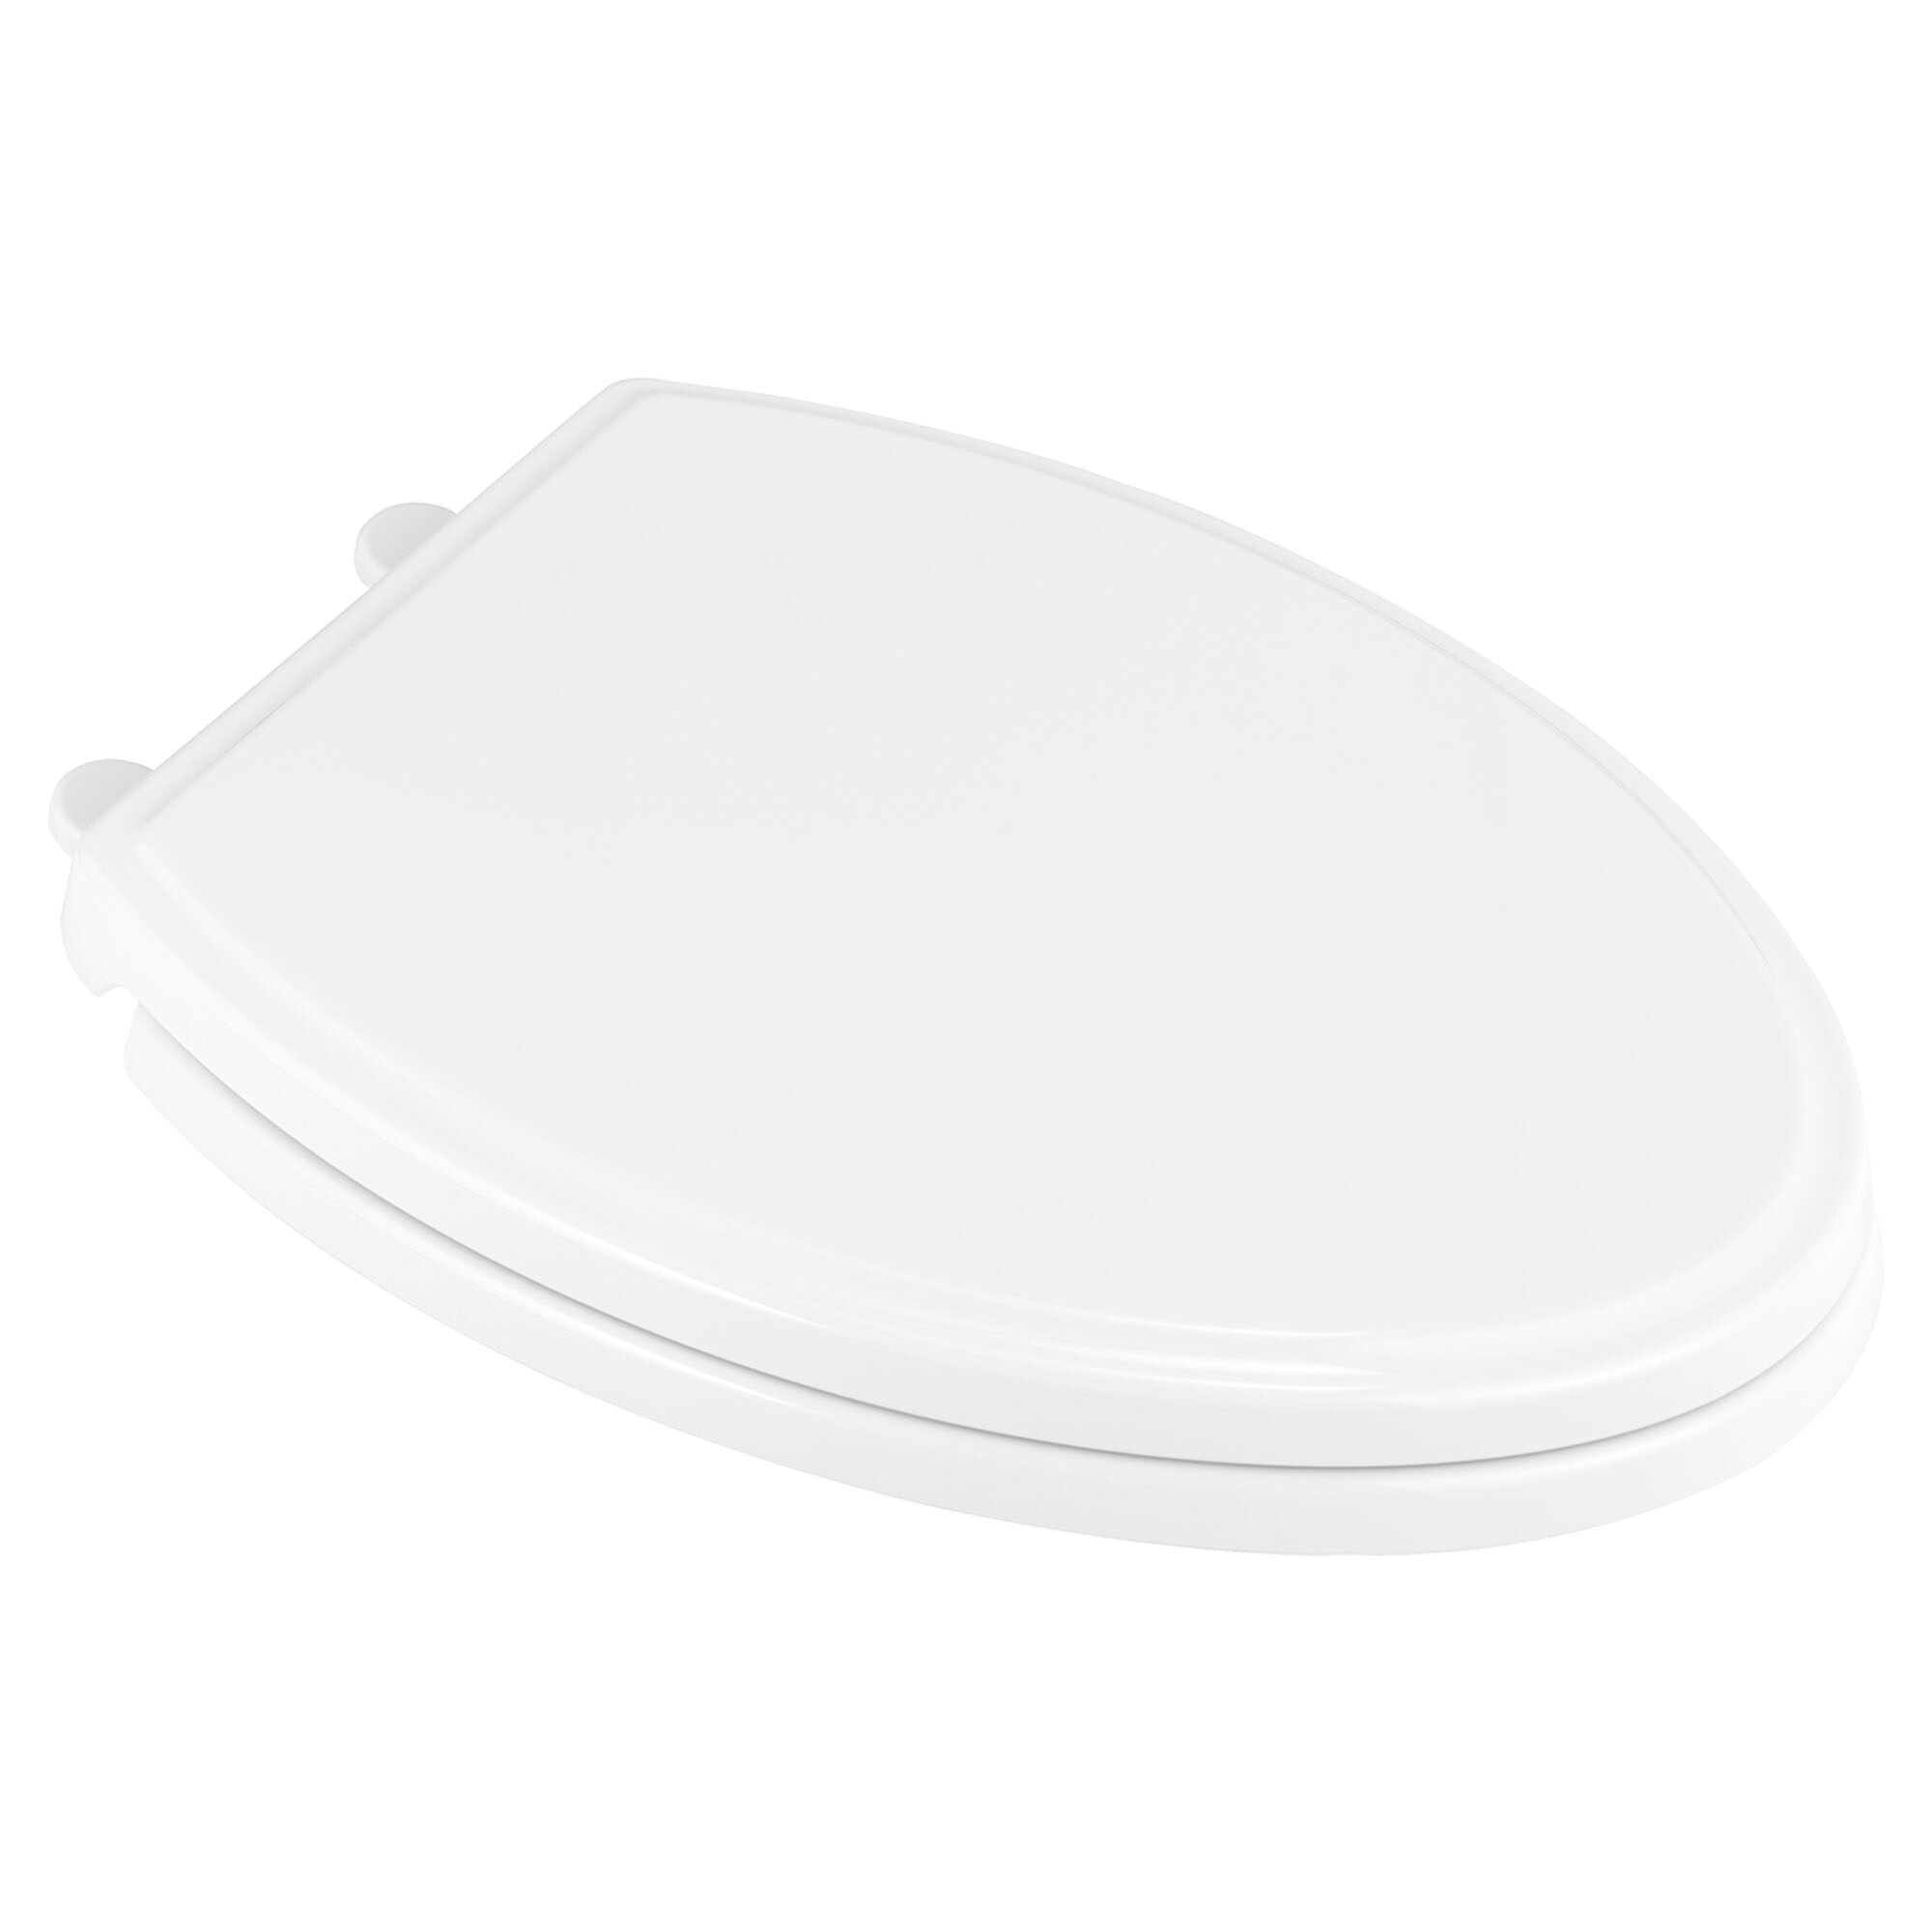 American Standard Mainstream Plastic Elongated Slow-close Toilet Seat for sale online 